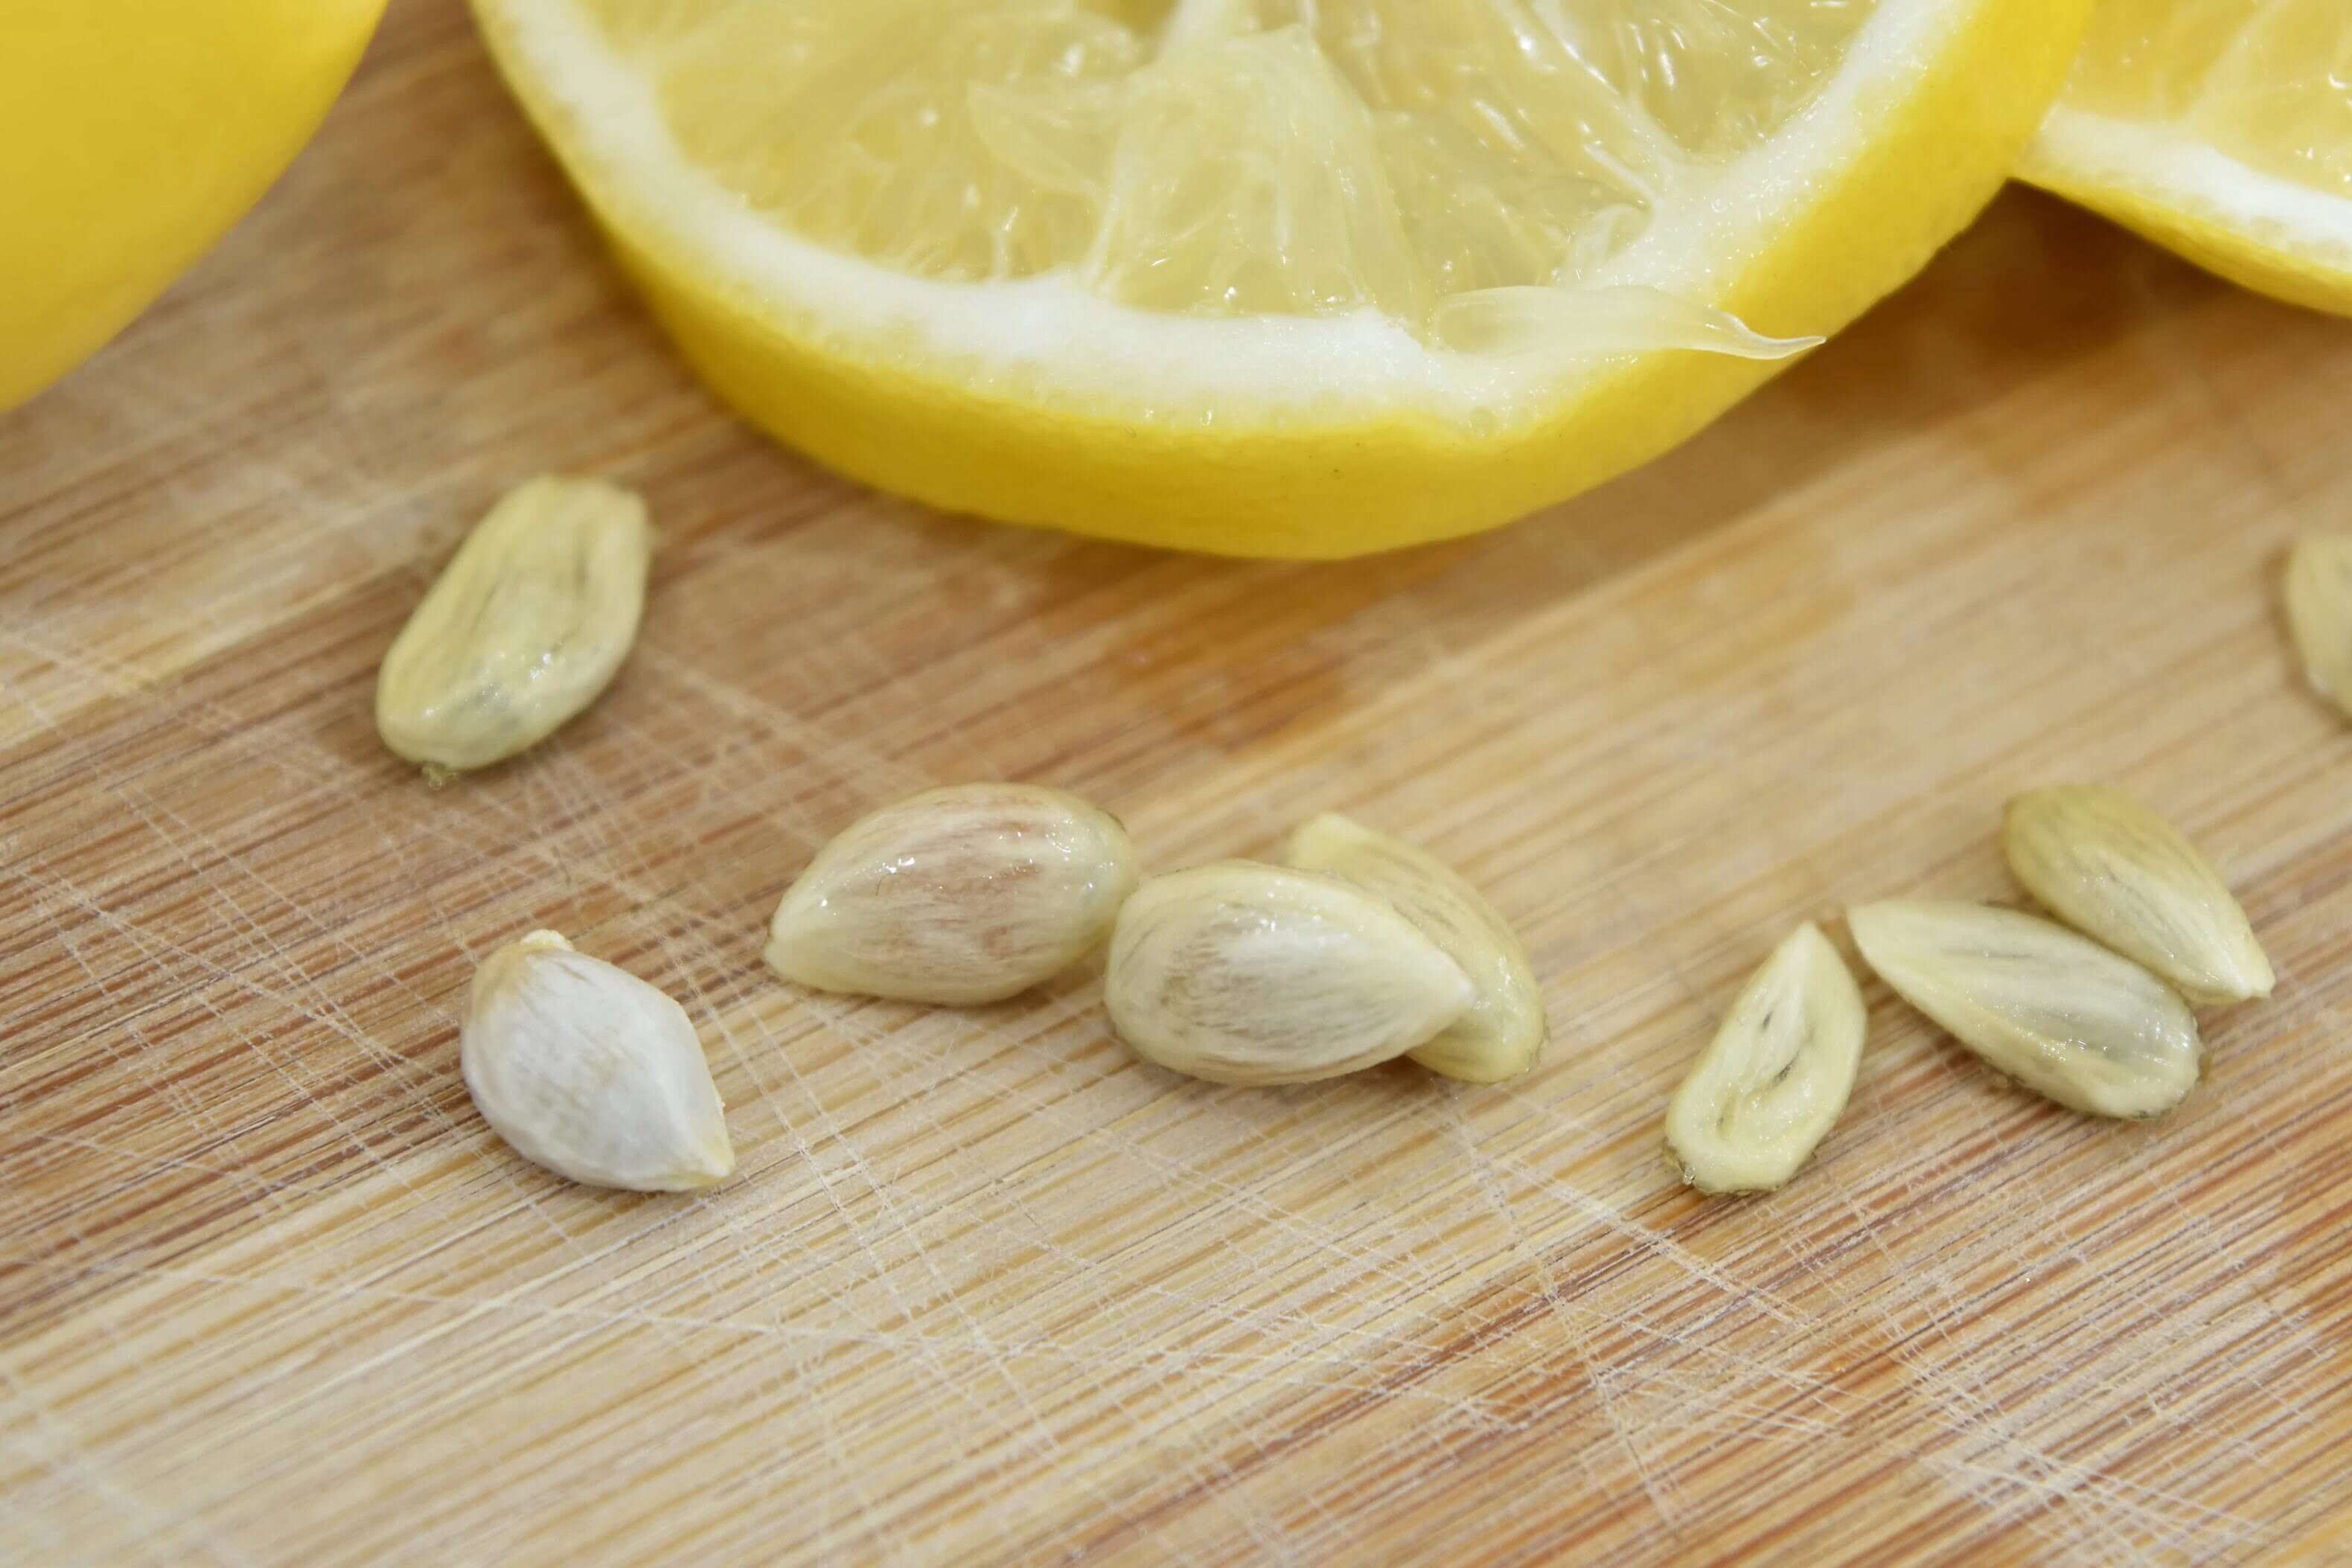 What If I Swallow A Lemon Seed